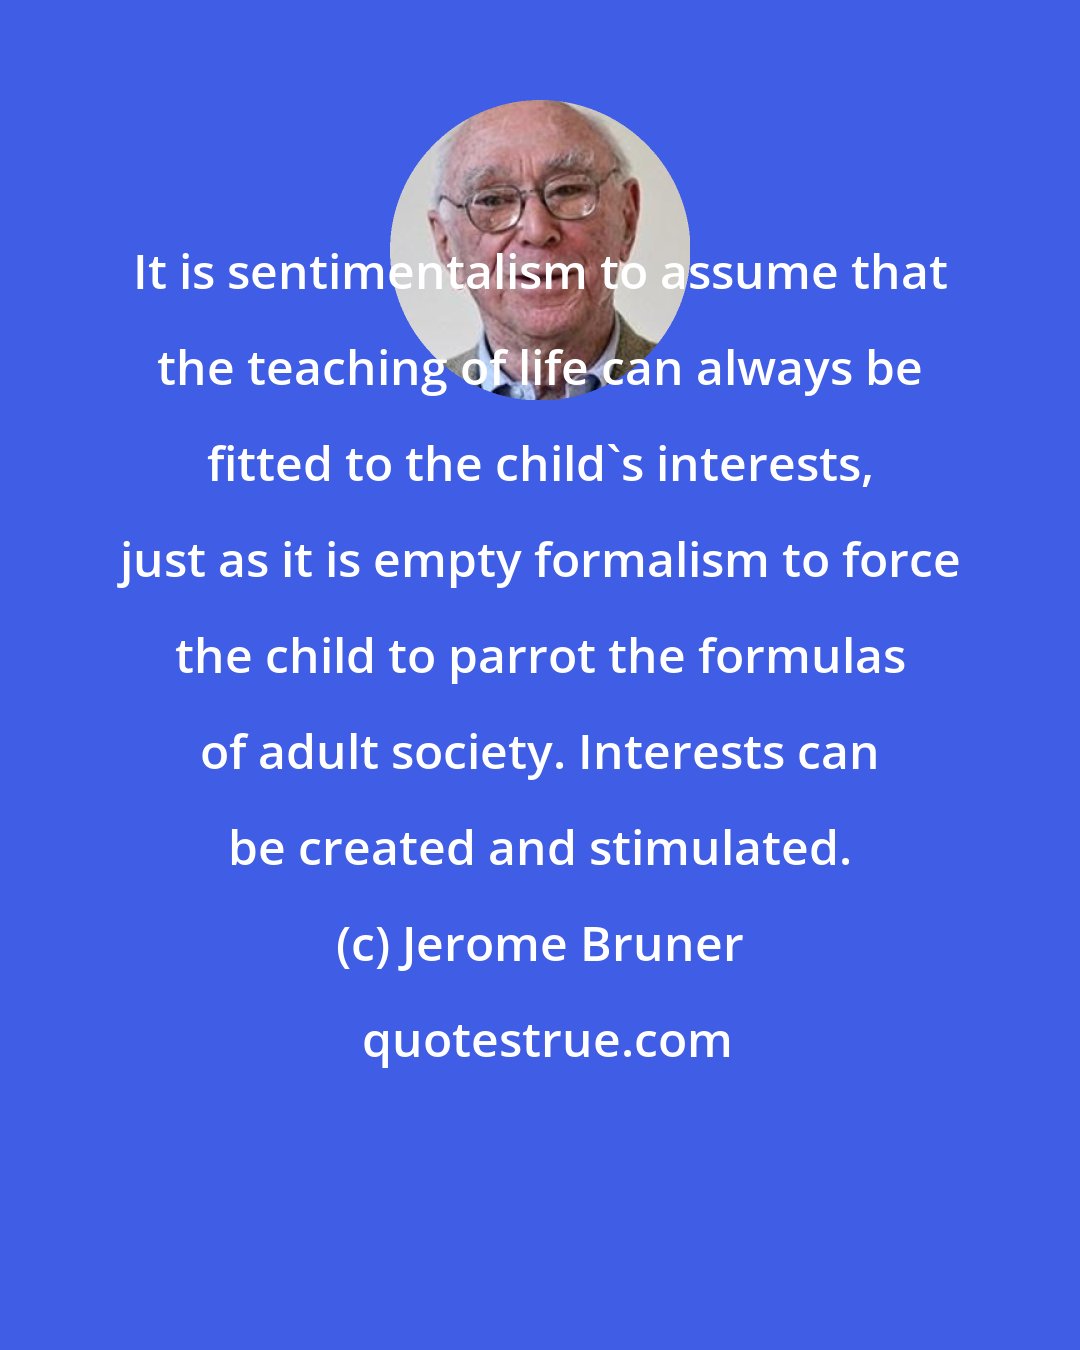 Jerome Bruner: It is sentimentalism to assume that the teaching of life can always be fitted to the child's interests, just as it is empty formalism to force the child to parrot the formulas of adult society. Interests can be created and stimulated.